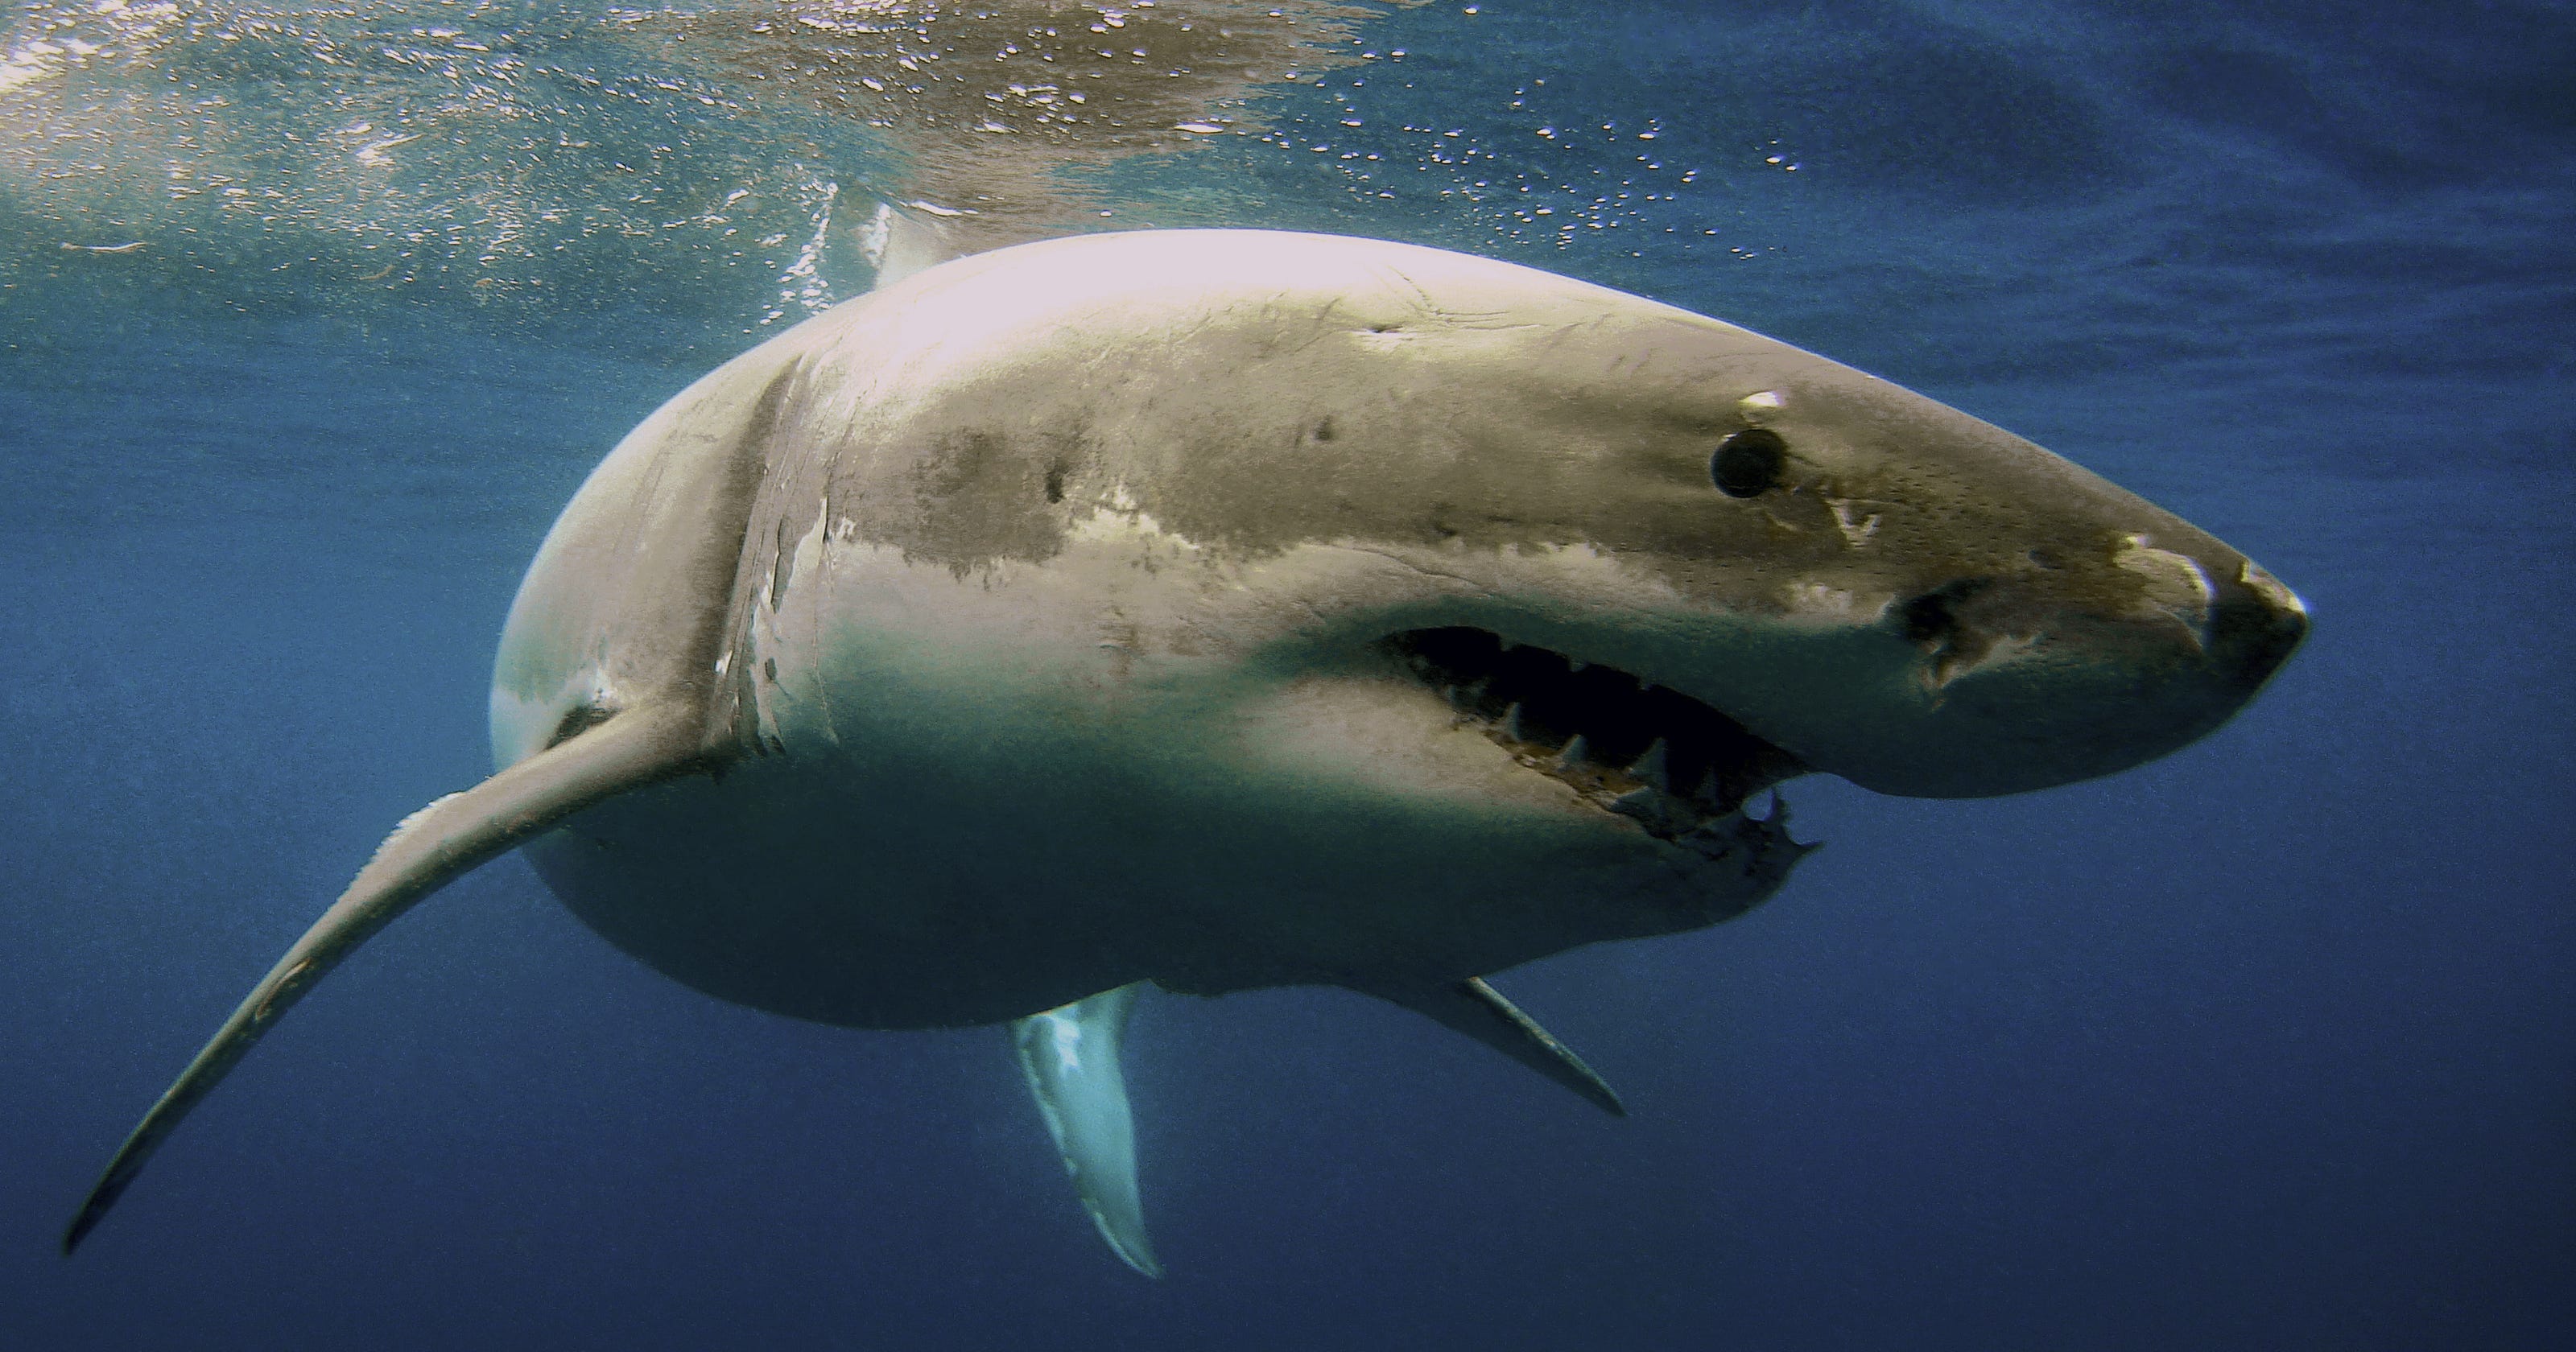 10 beaches where you might spot sharks from the shore